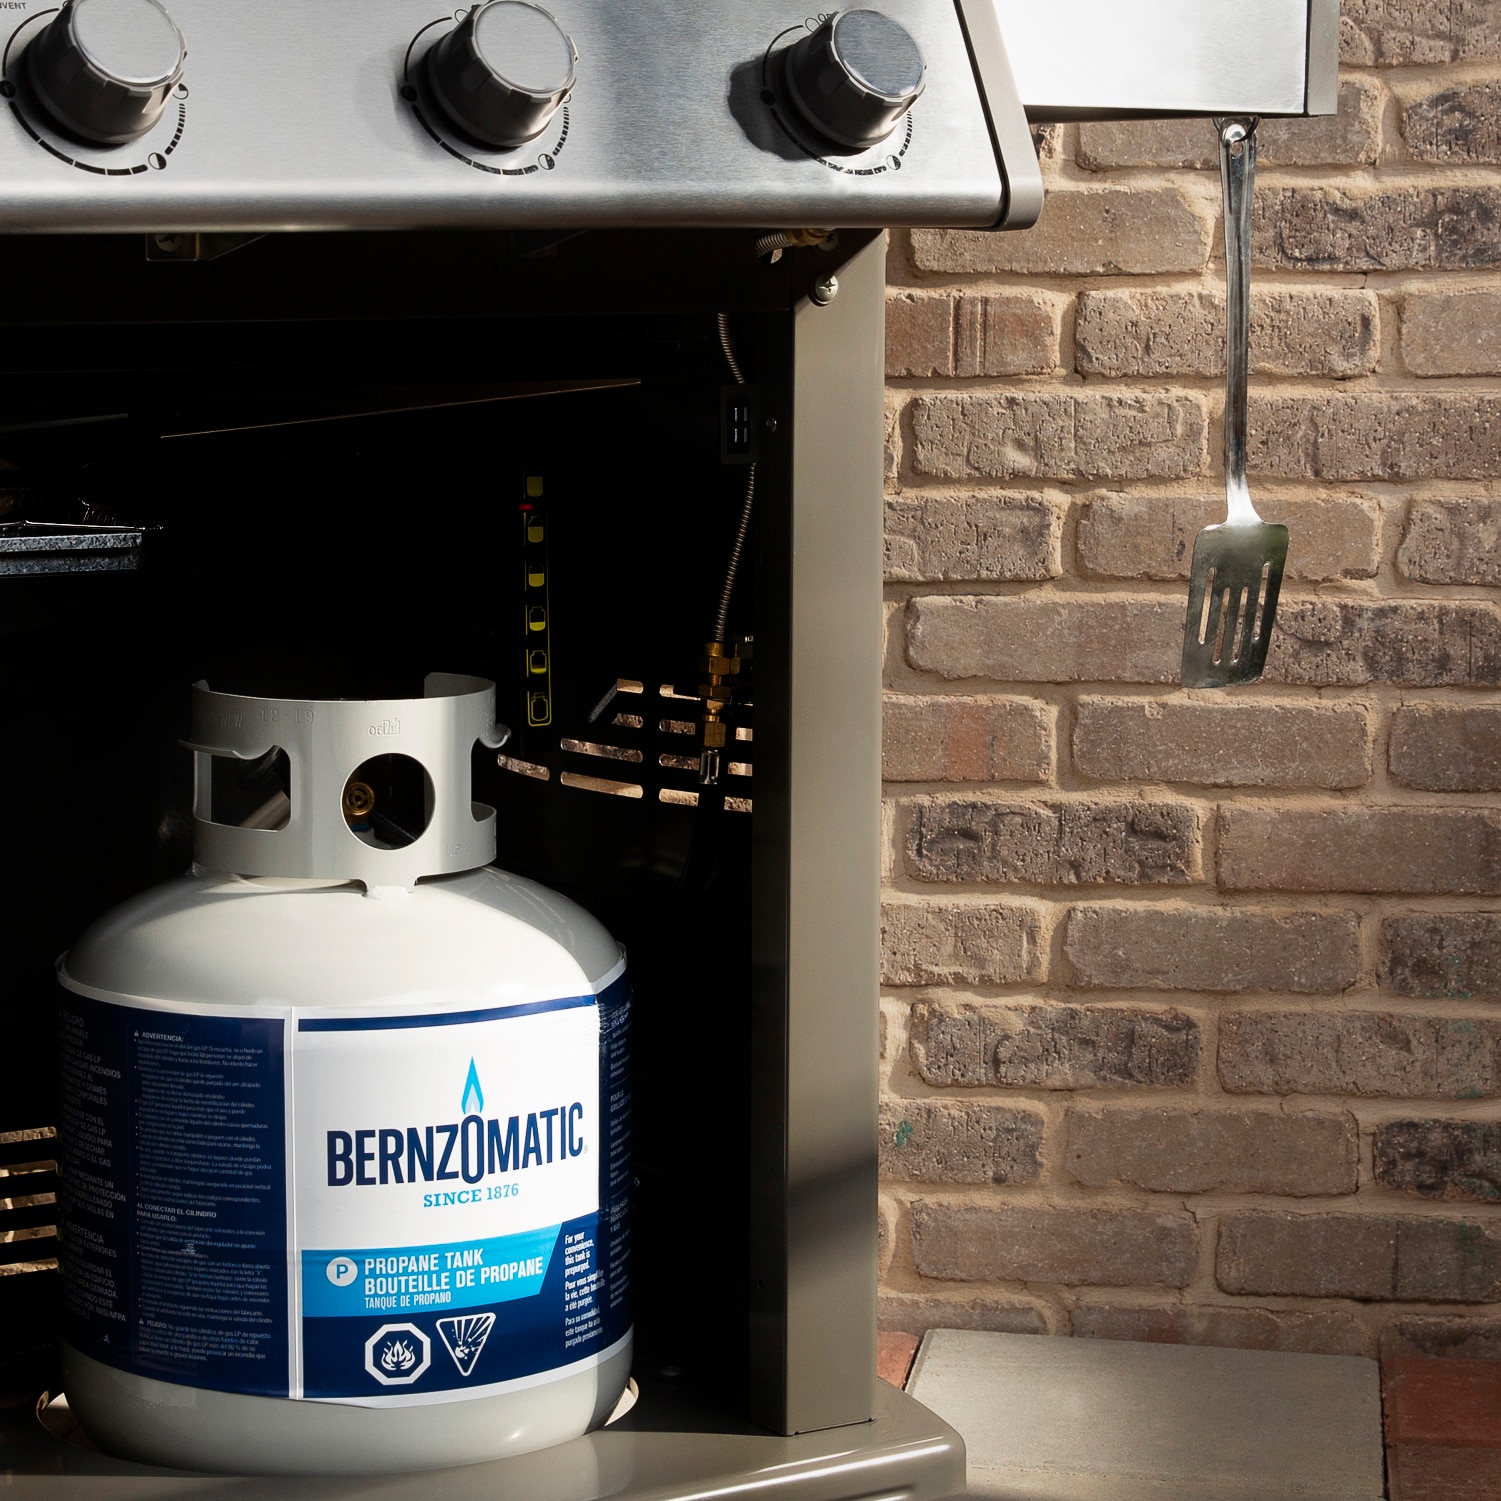 Bernzomatic Standard Propane Fuel Cylinder - Pack of 3, Portable, Durable,  and Versatile, High Flame Temperature for Efficient Heating